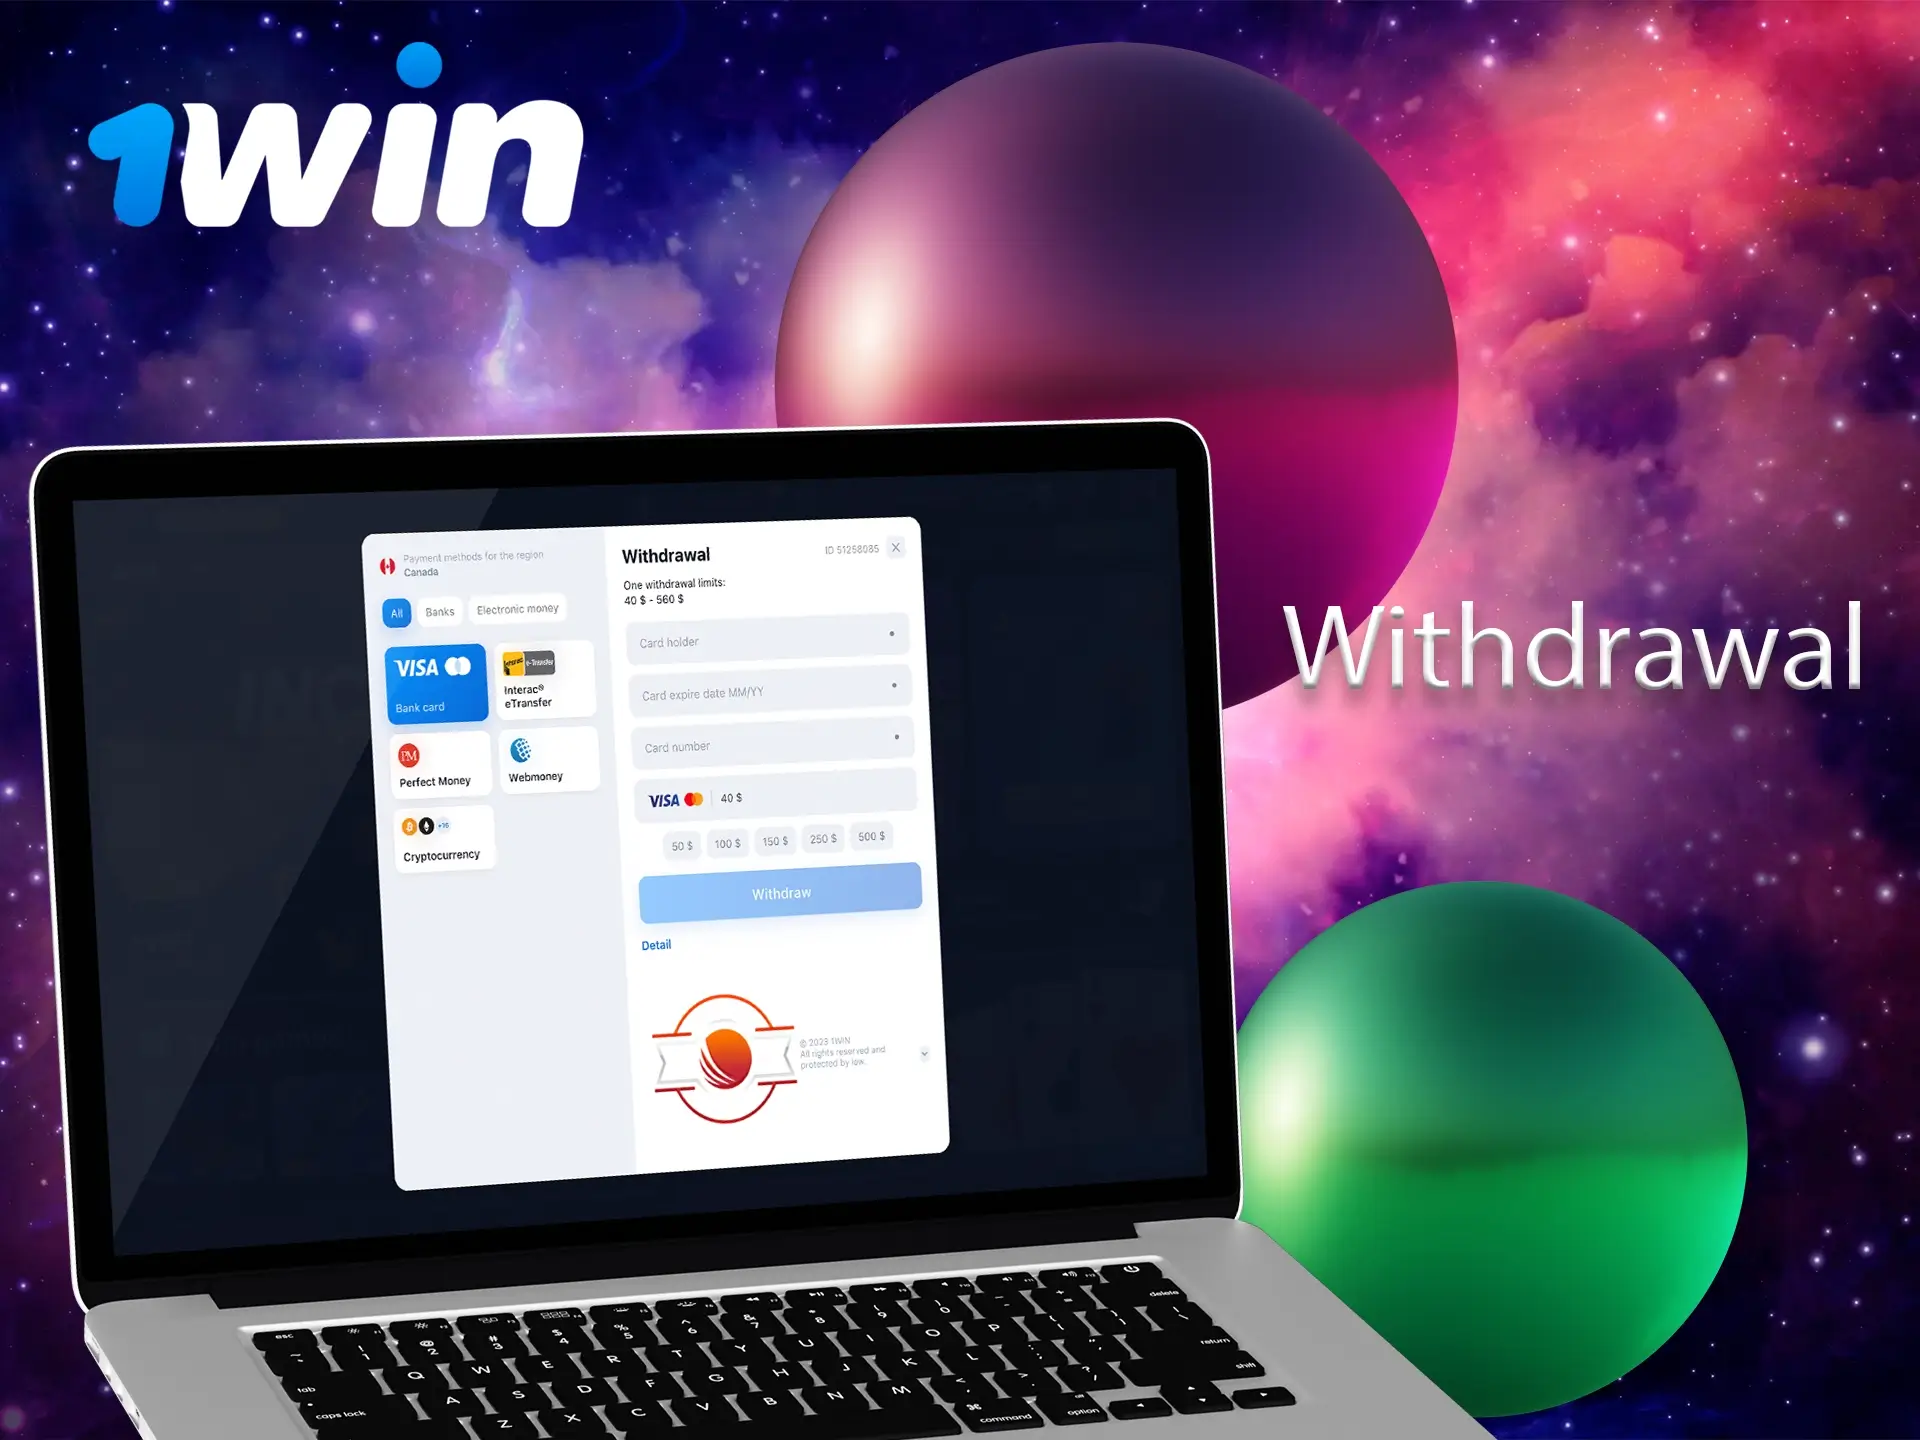 Many available withdrawal options in the currency you want are available at 1Win.